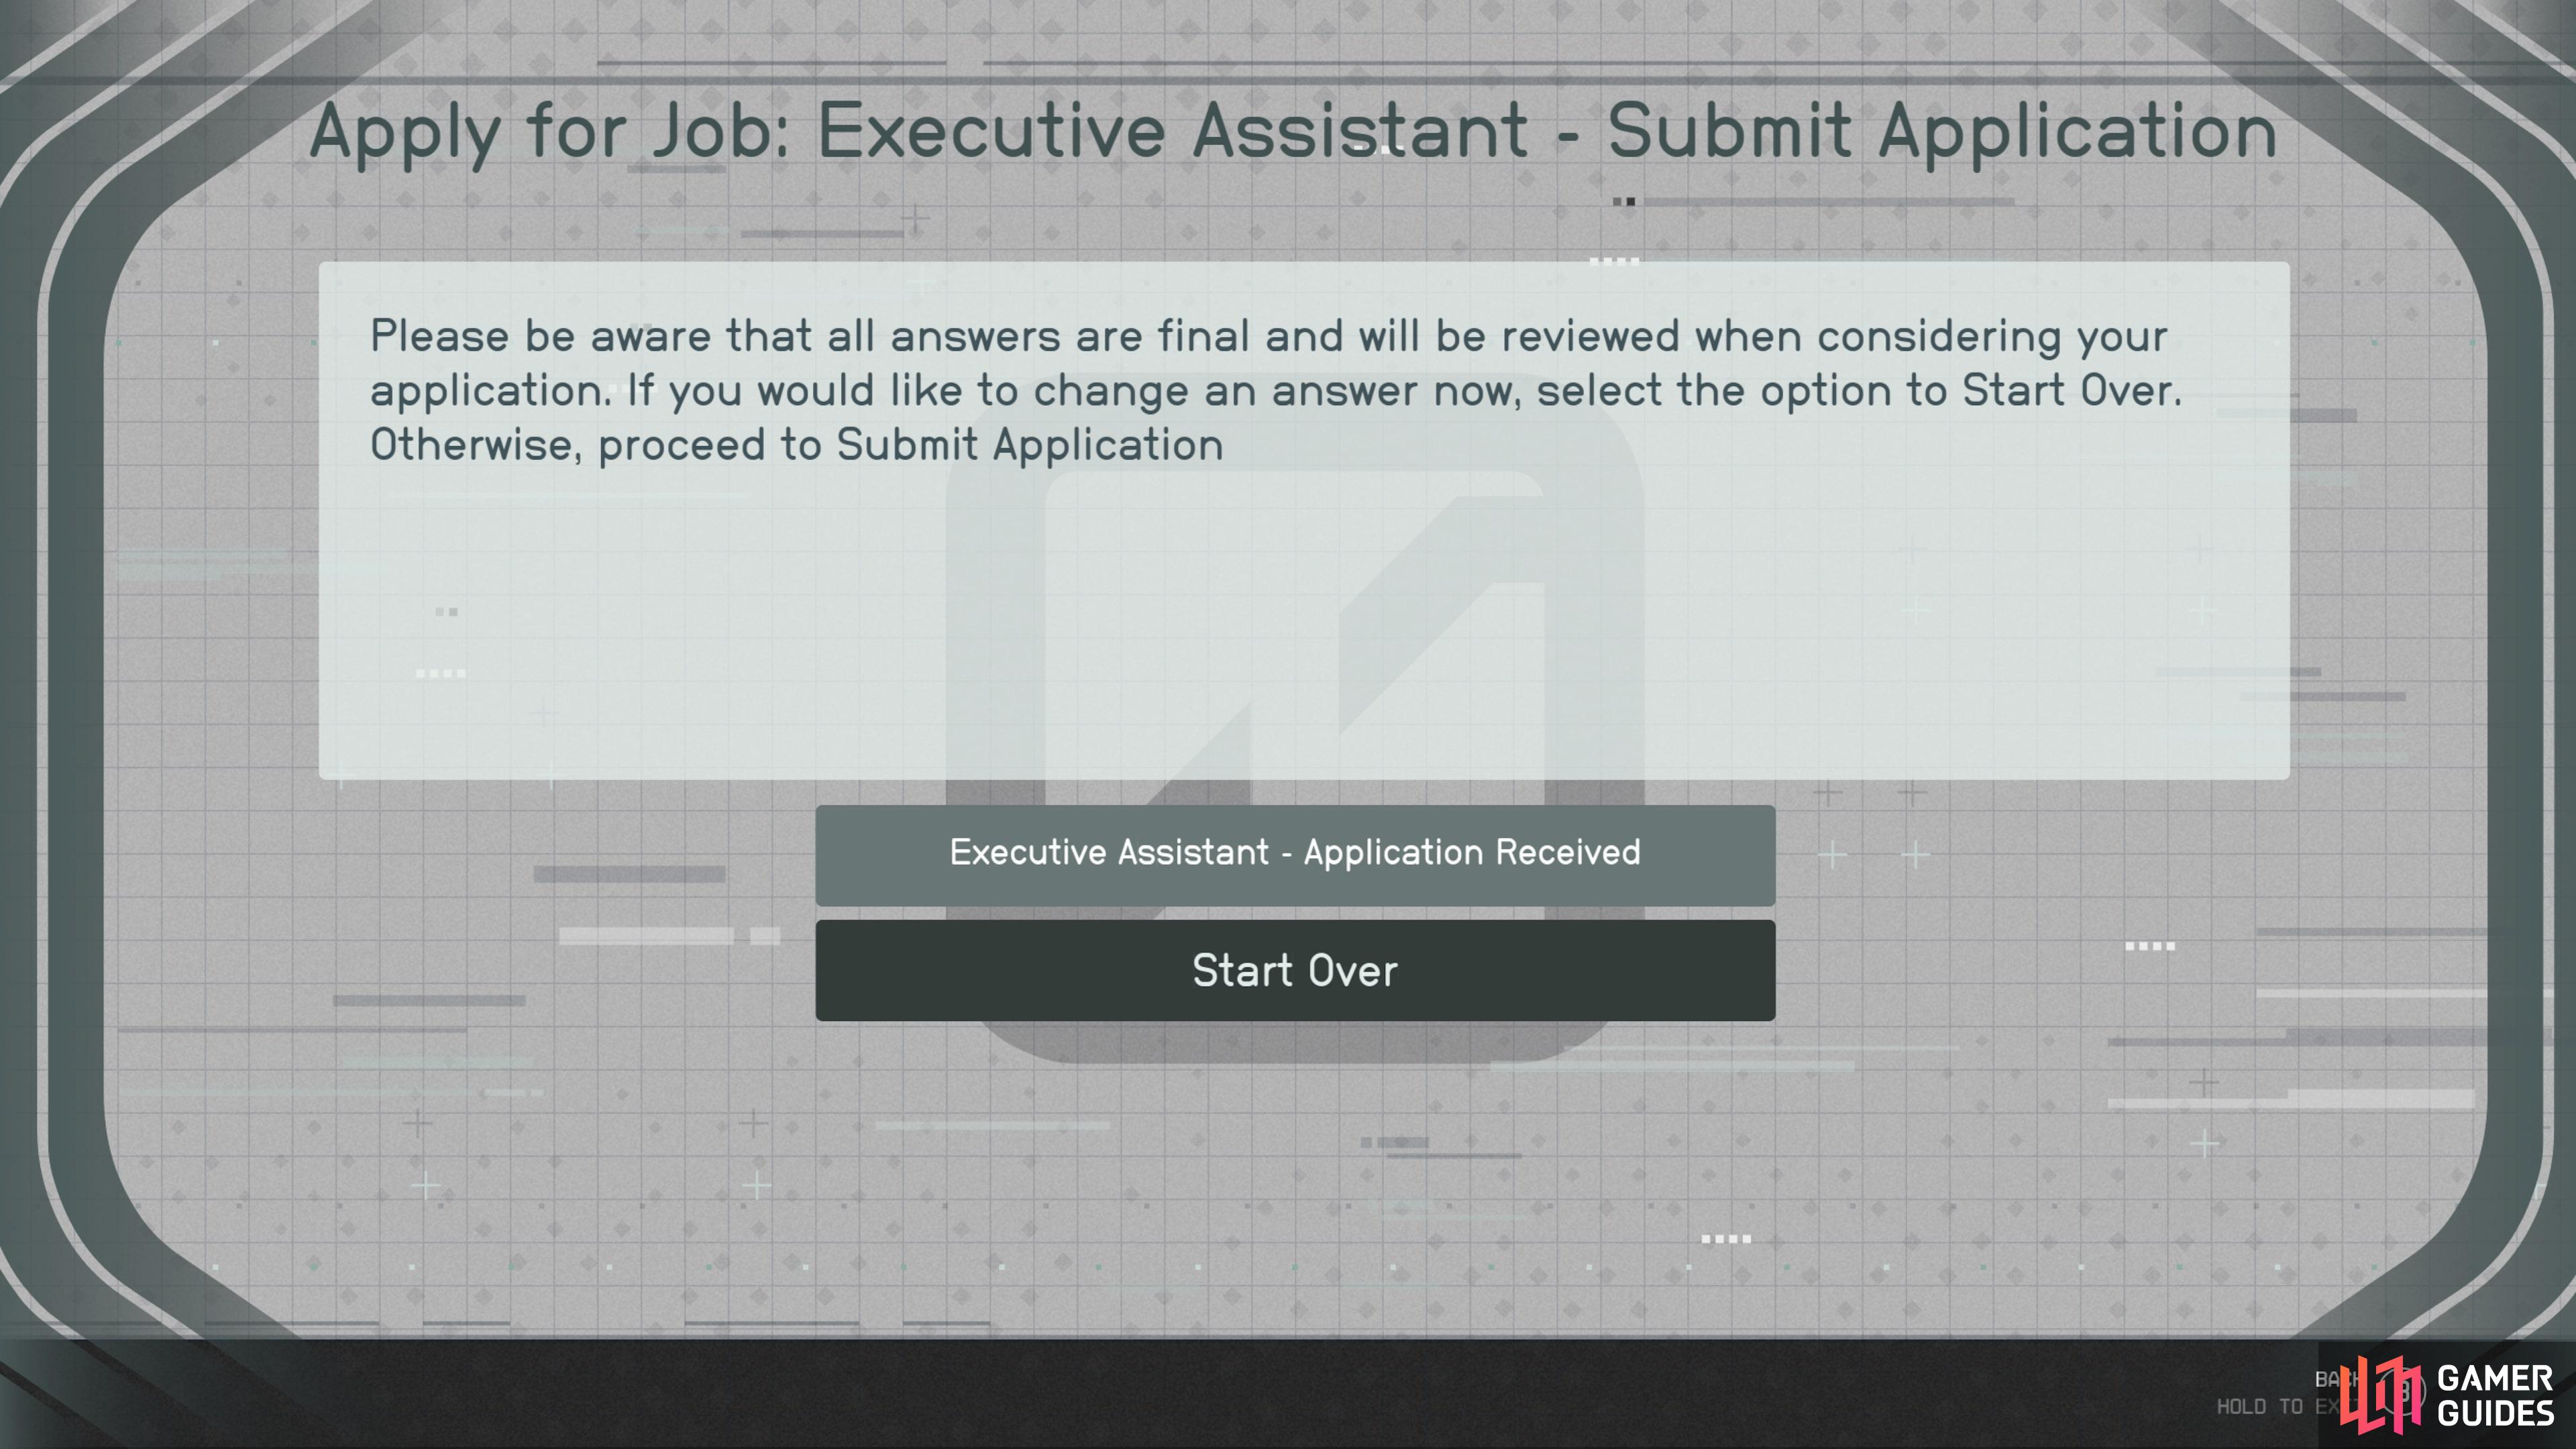 If you do want to have a good application though, you can go back in and change your answers.